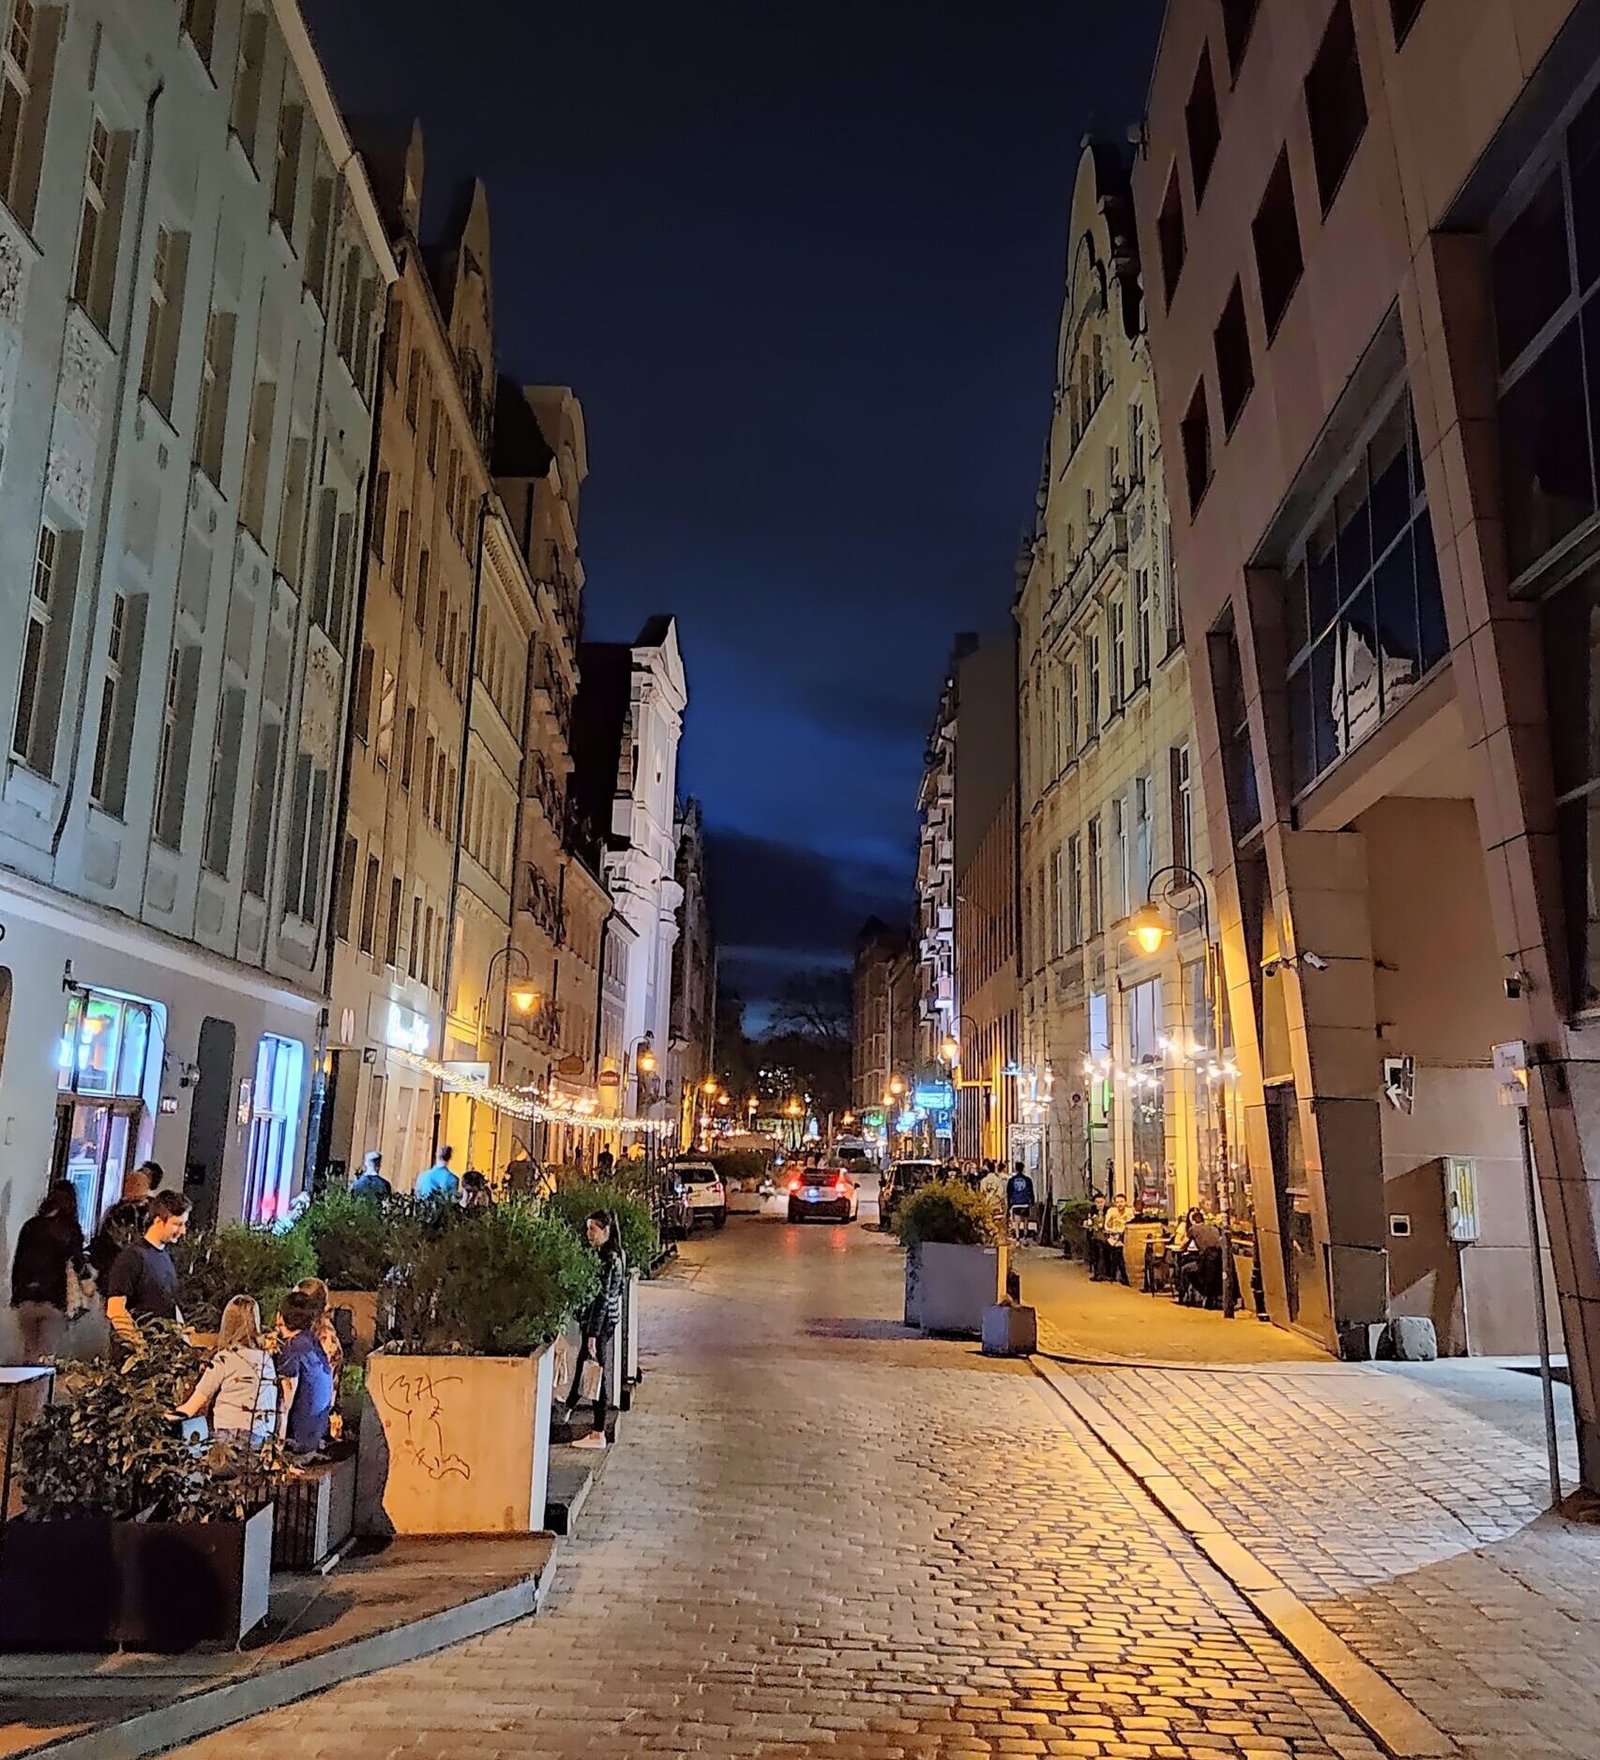 Antoniego street, the most characteristic of the quarter of four denominations, and the one with the most bars and restaurants along it. One of the 3 coolest streets in Wrocław.